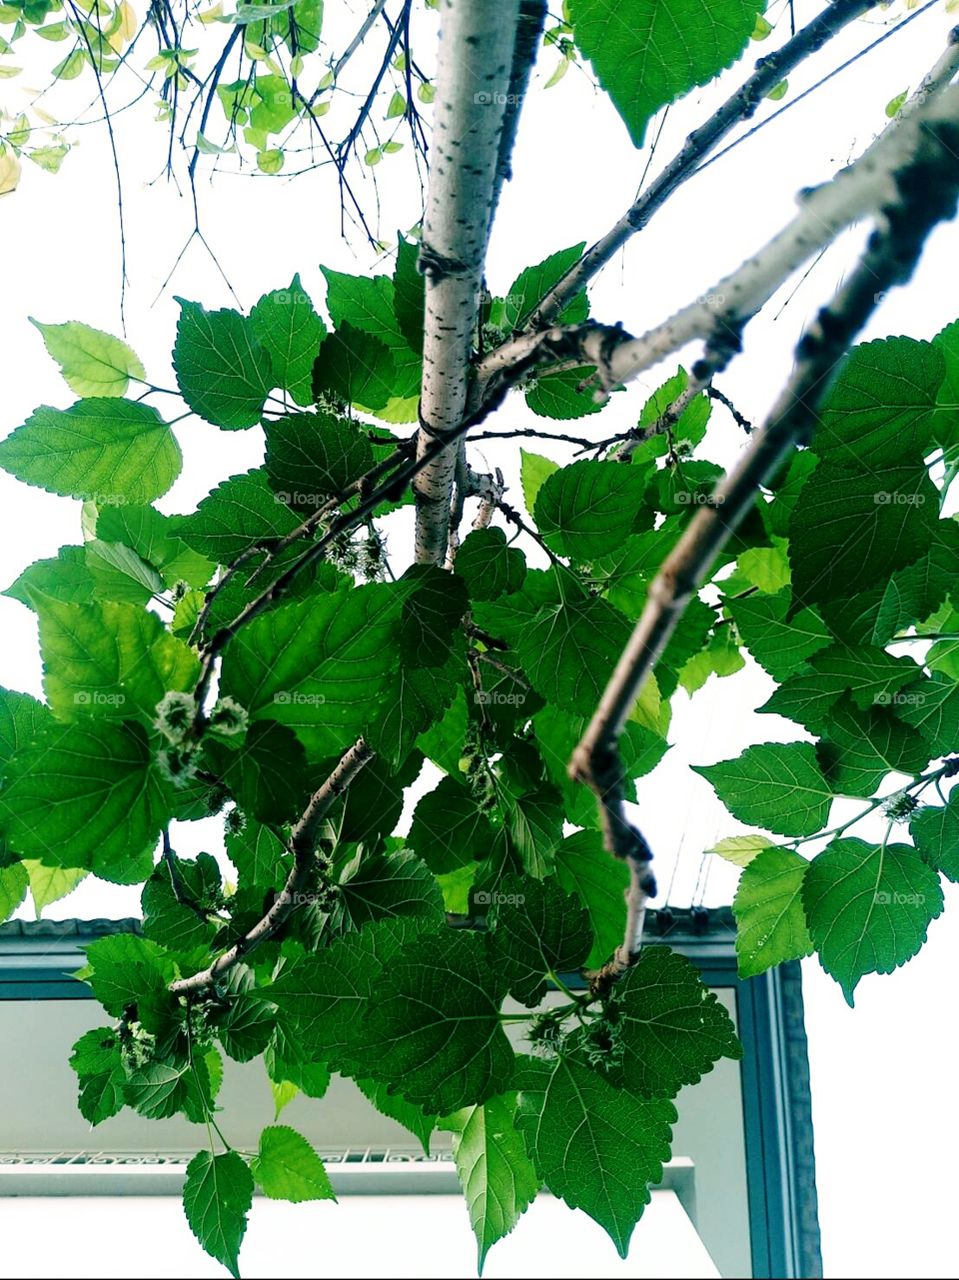 mulberry
fruit